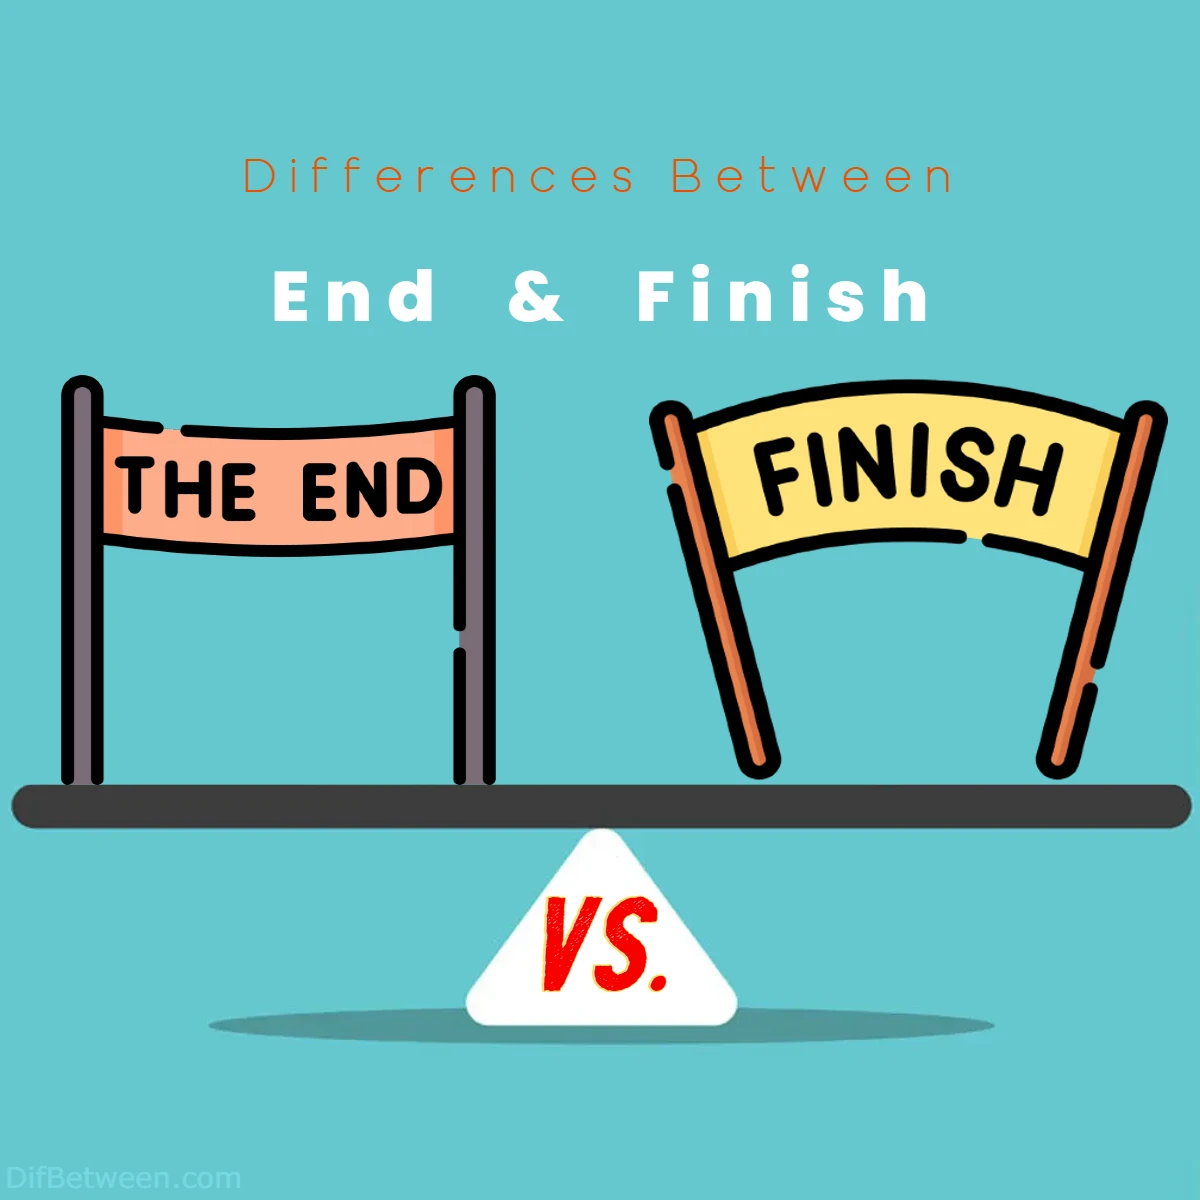 Differences Between End vs Finish